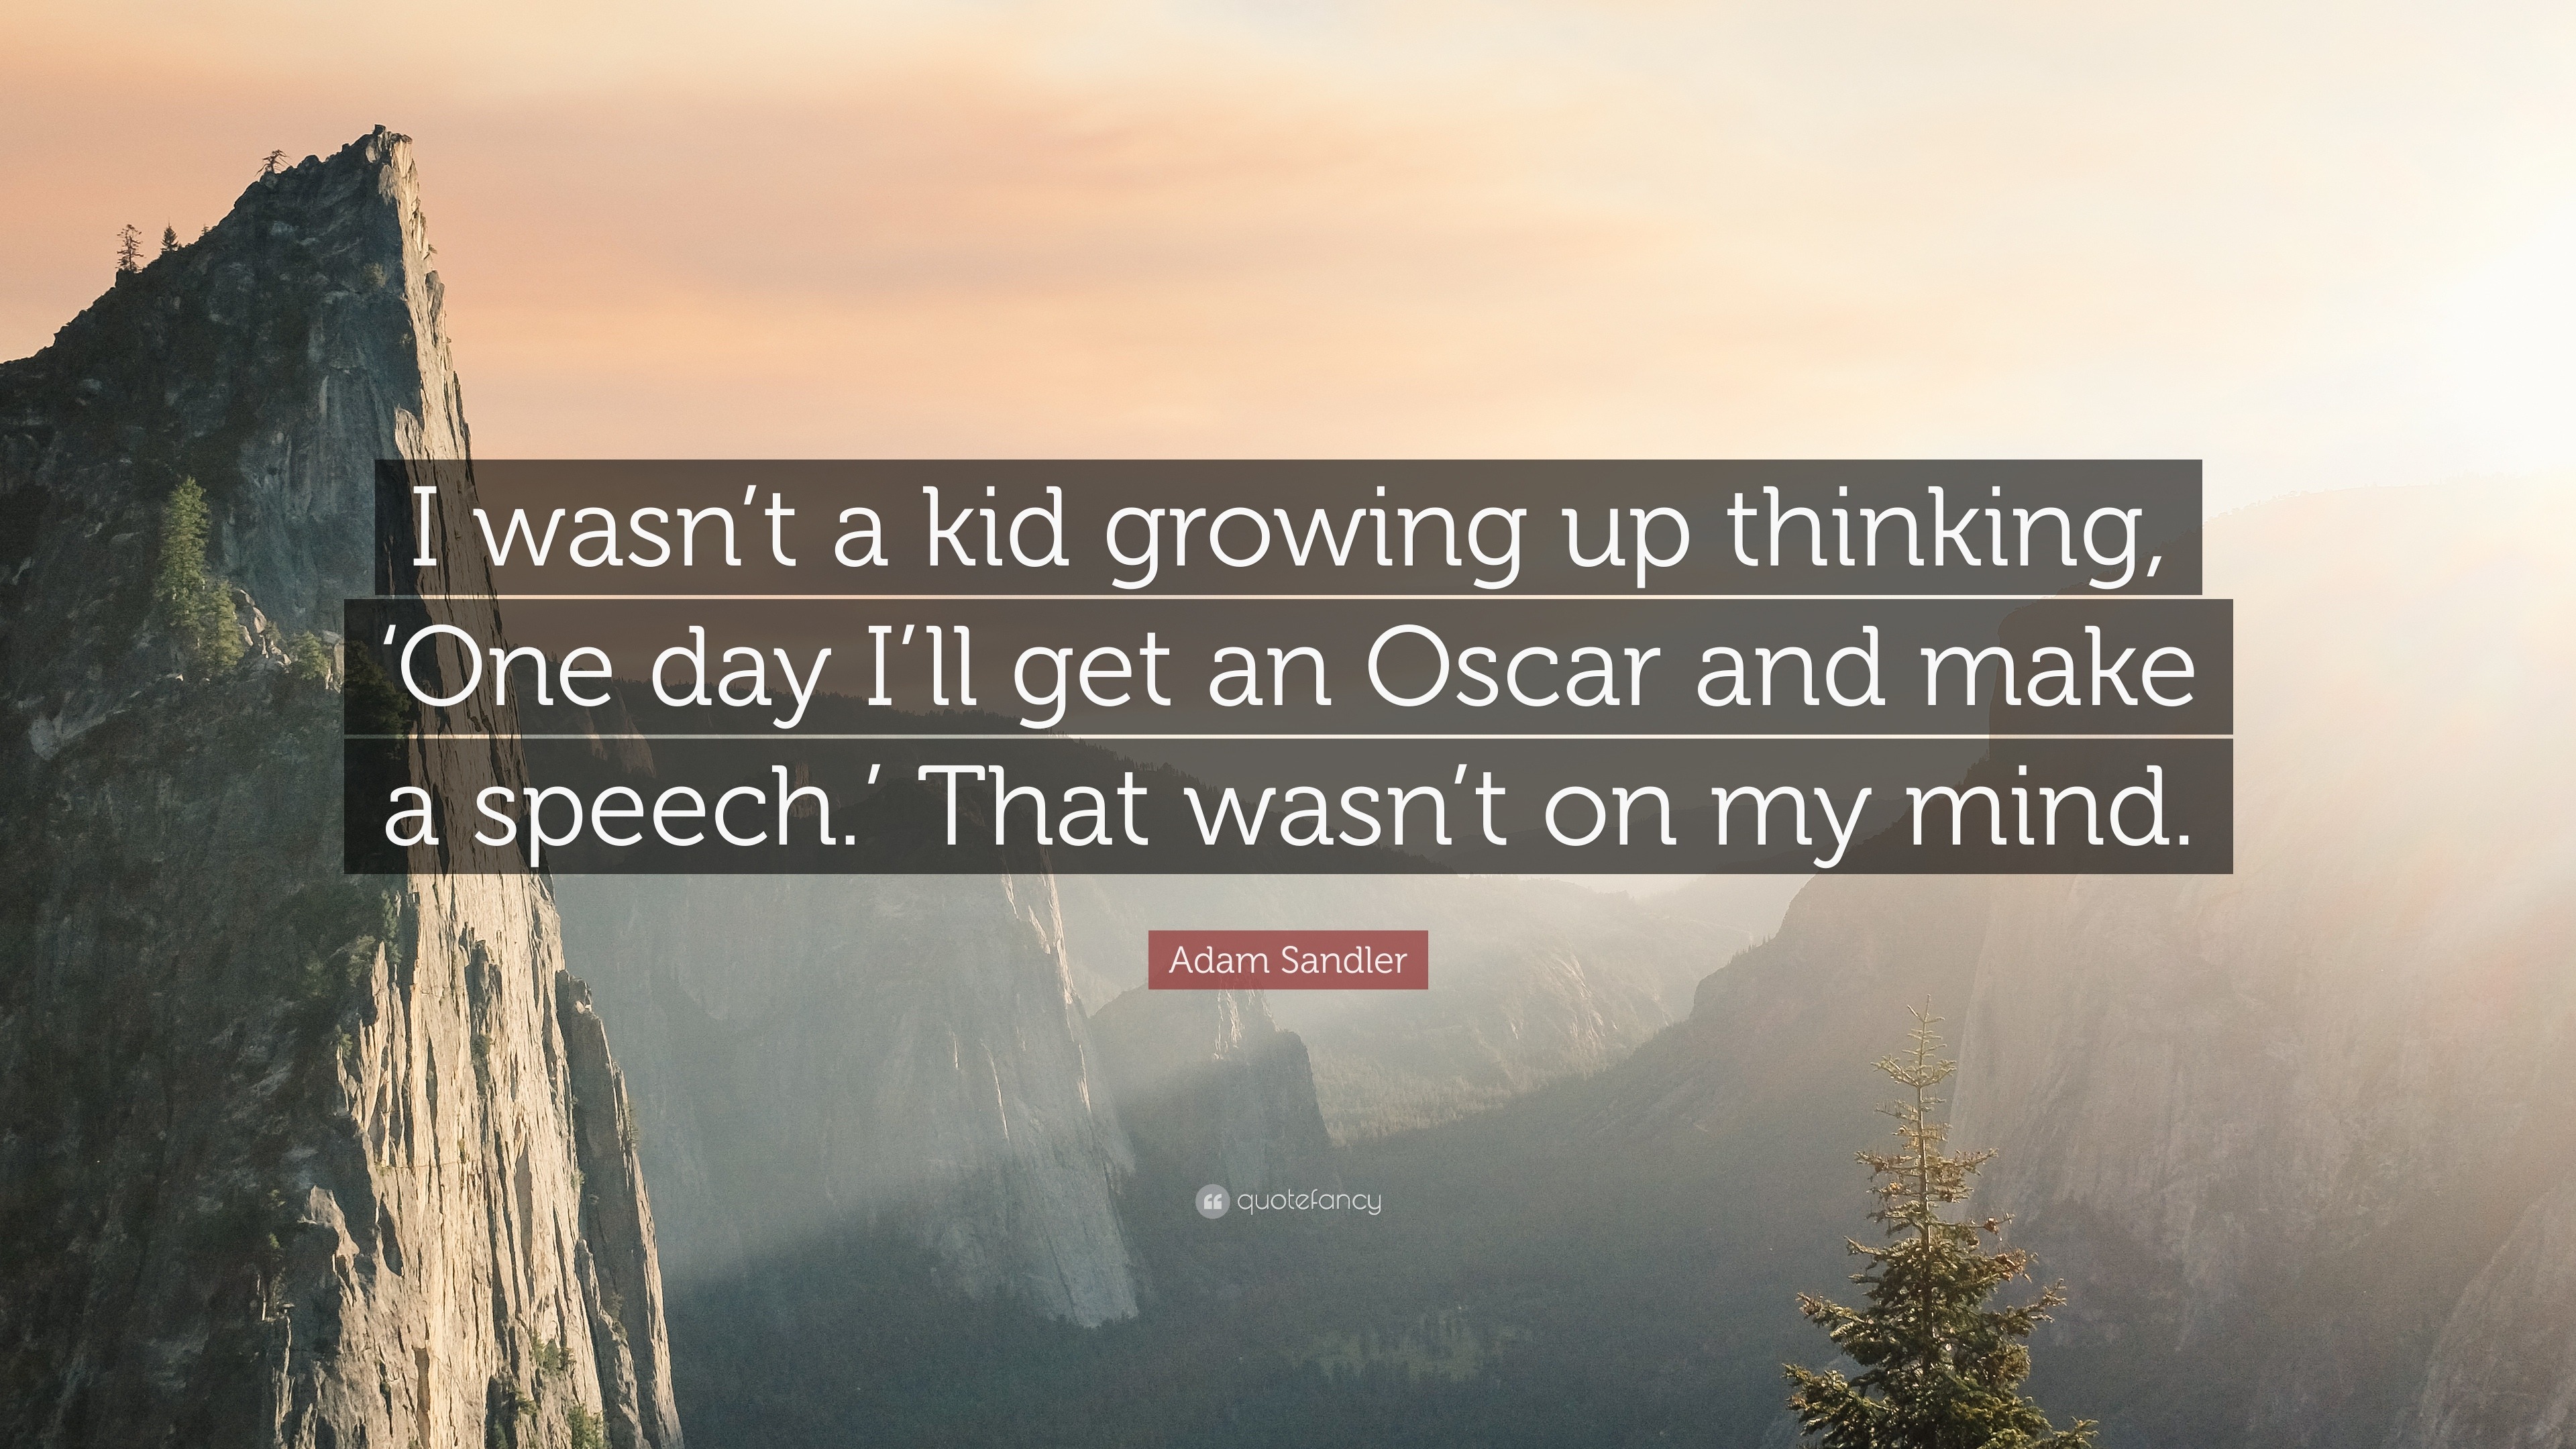 Adam Sandler Quote I Wasn T A Kid Growing Up Thinking One Day I Ll Get An Oscar And Make A Speech That Wasn T On My Mind 7 Wallpapers Quotefancy